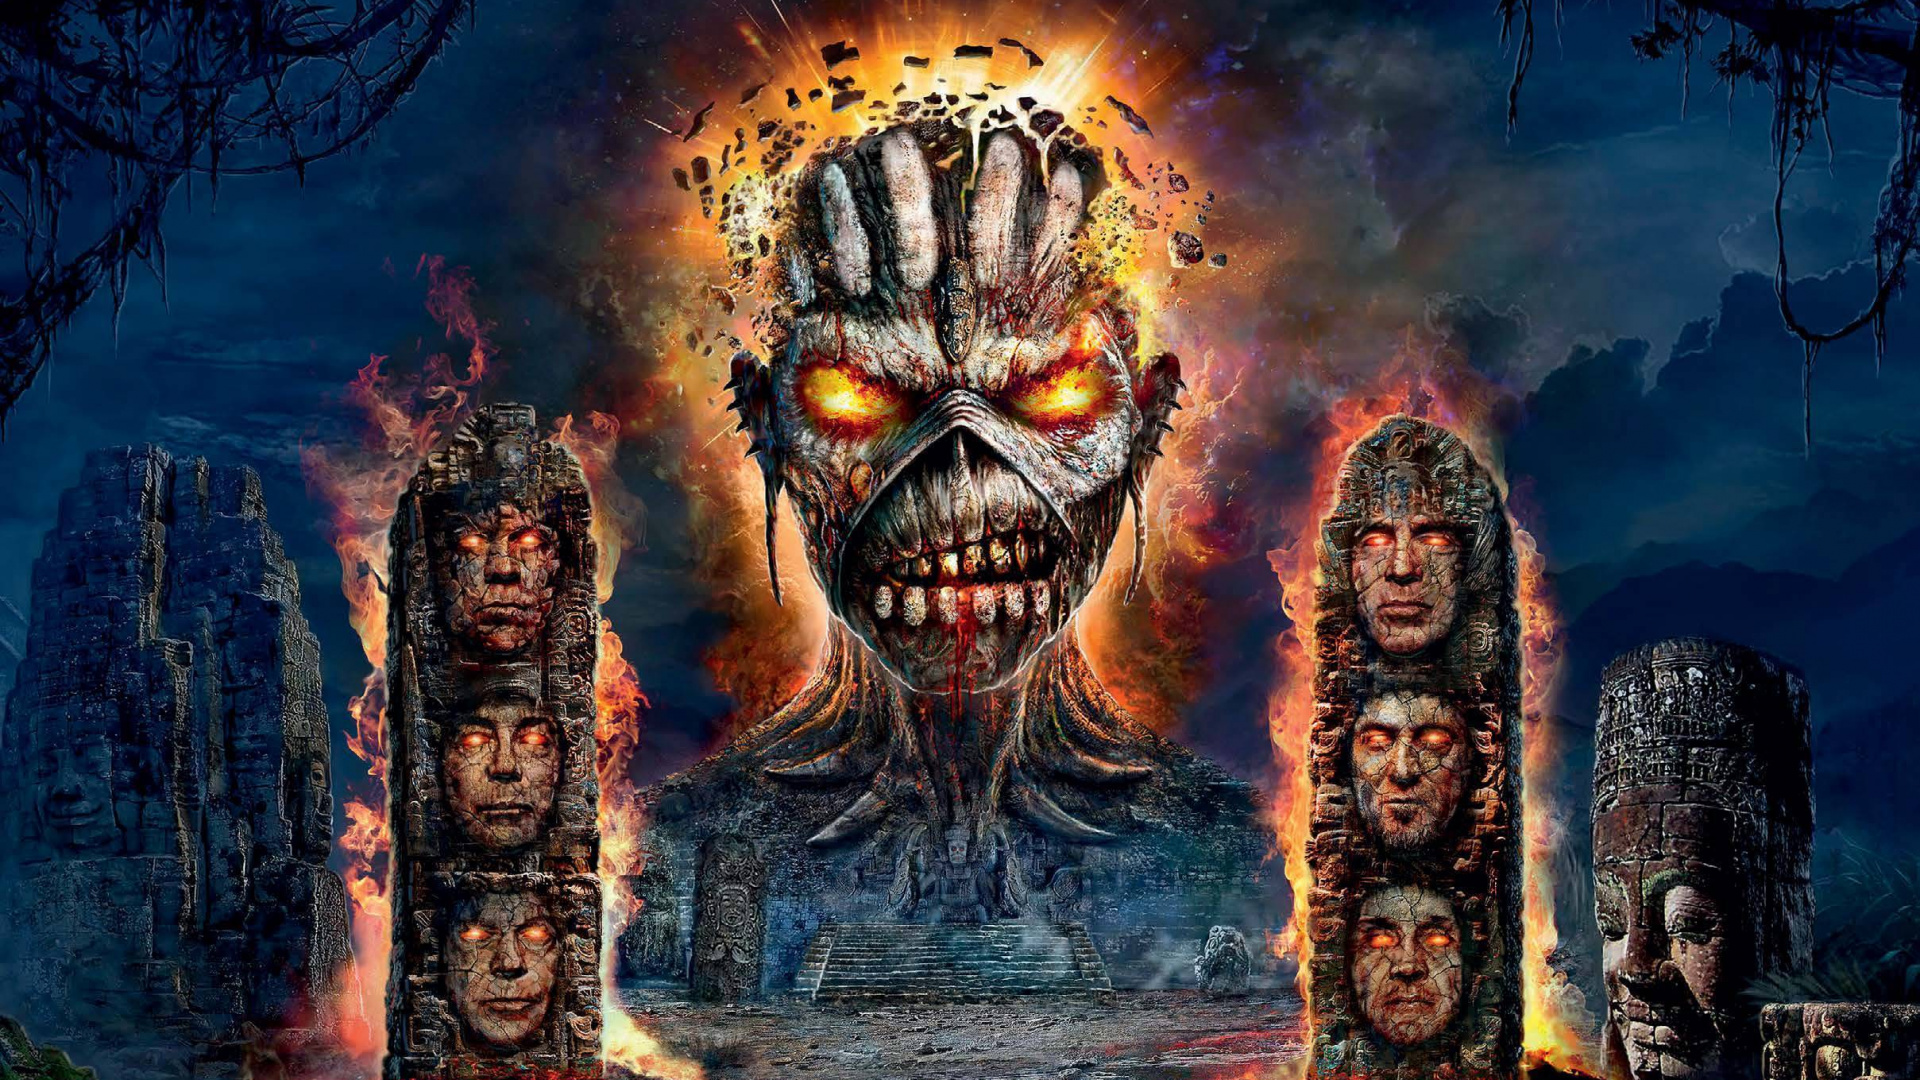 Iron Maiden, The Book of Souls World Tour, The Book of Souls, Heavy Metal, Eddie. Wallpaper in 1920x1080 Resolution